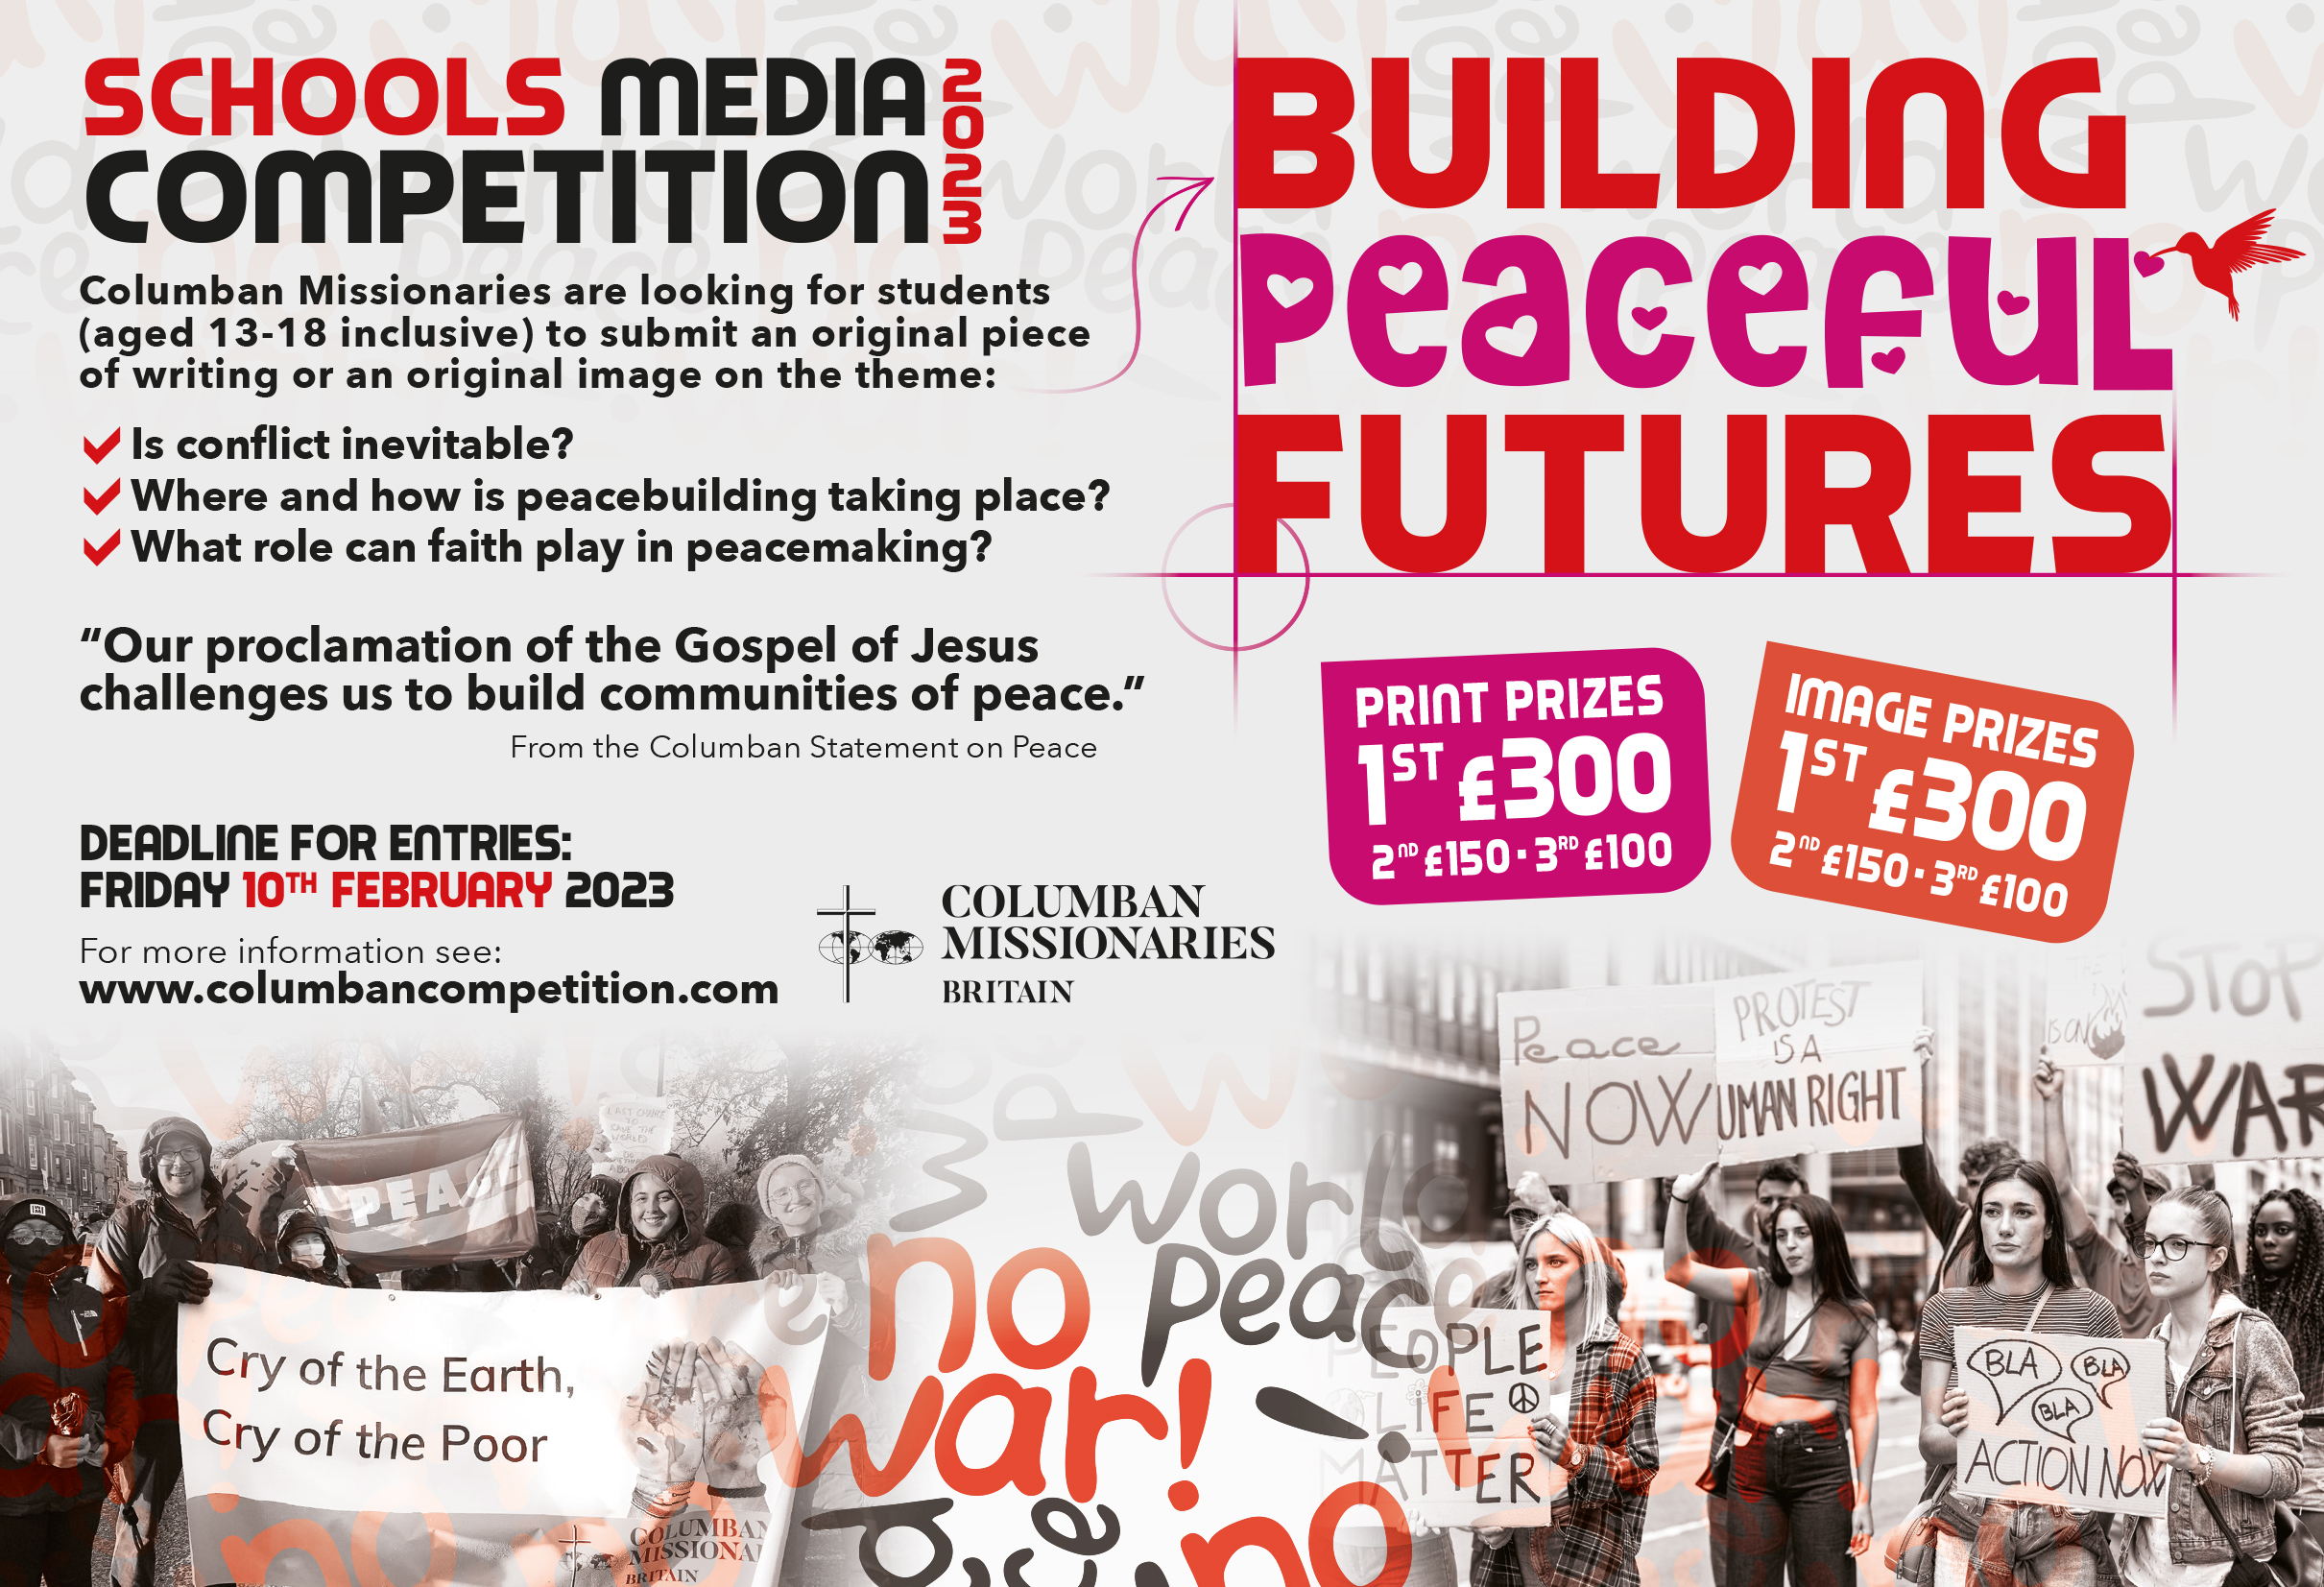 Columbans launch competition, 'Building Peaceful Futures